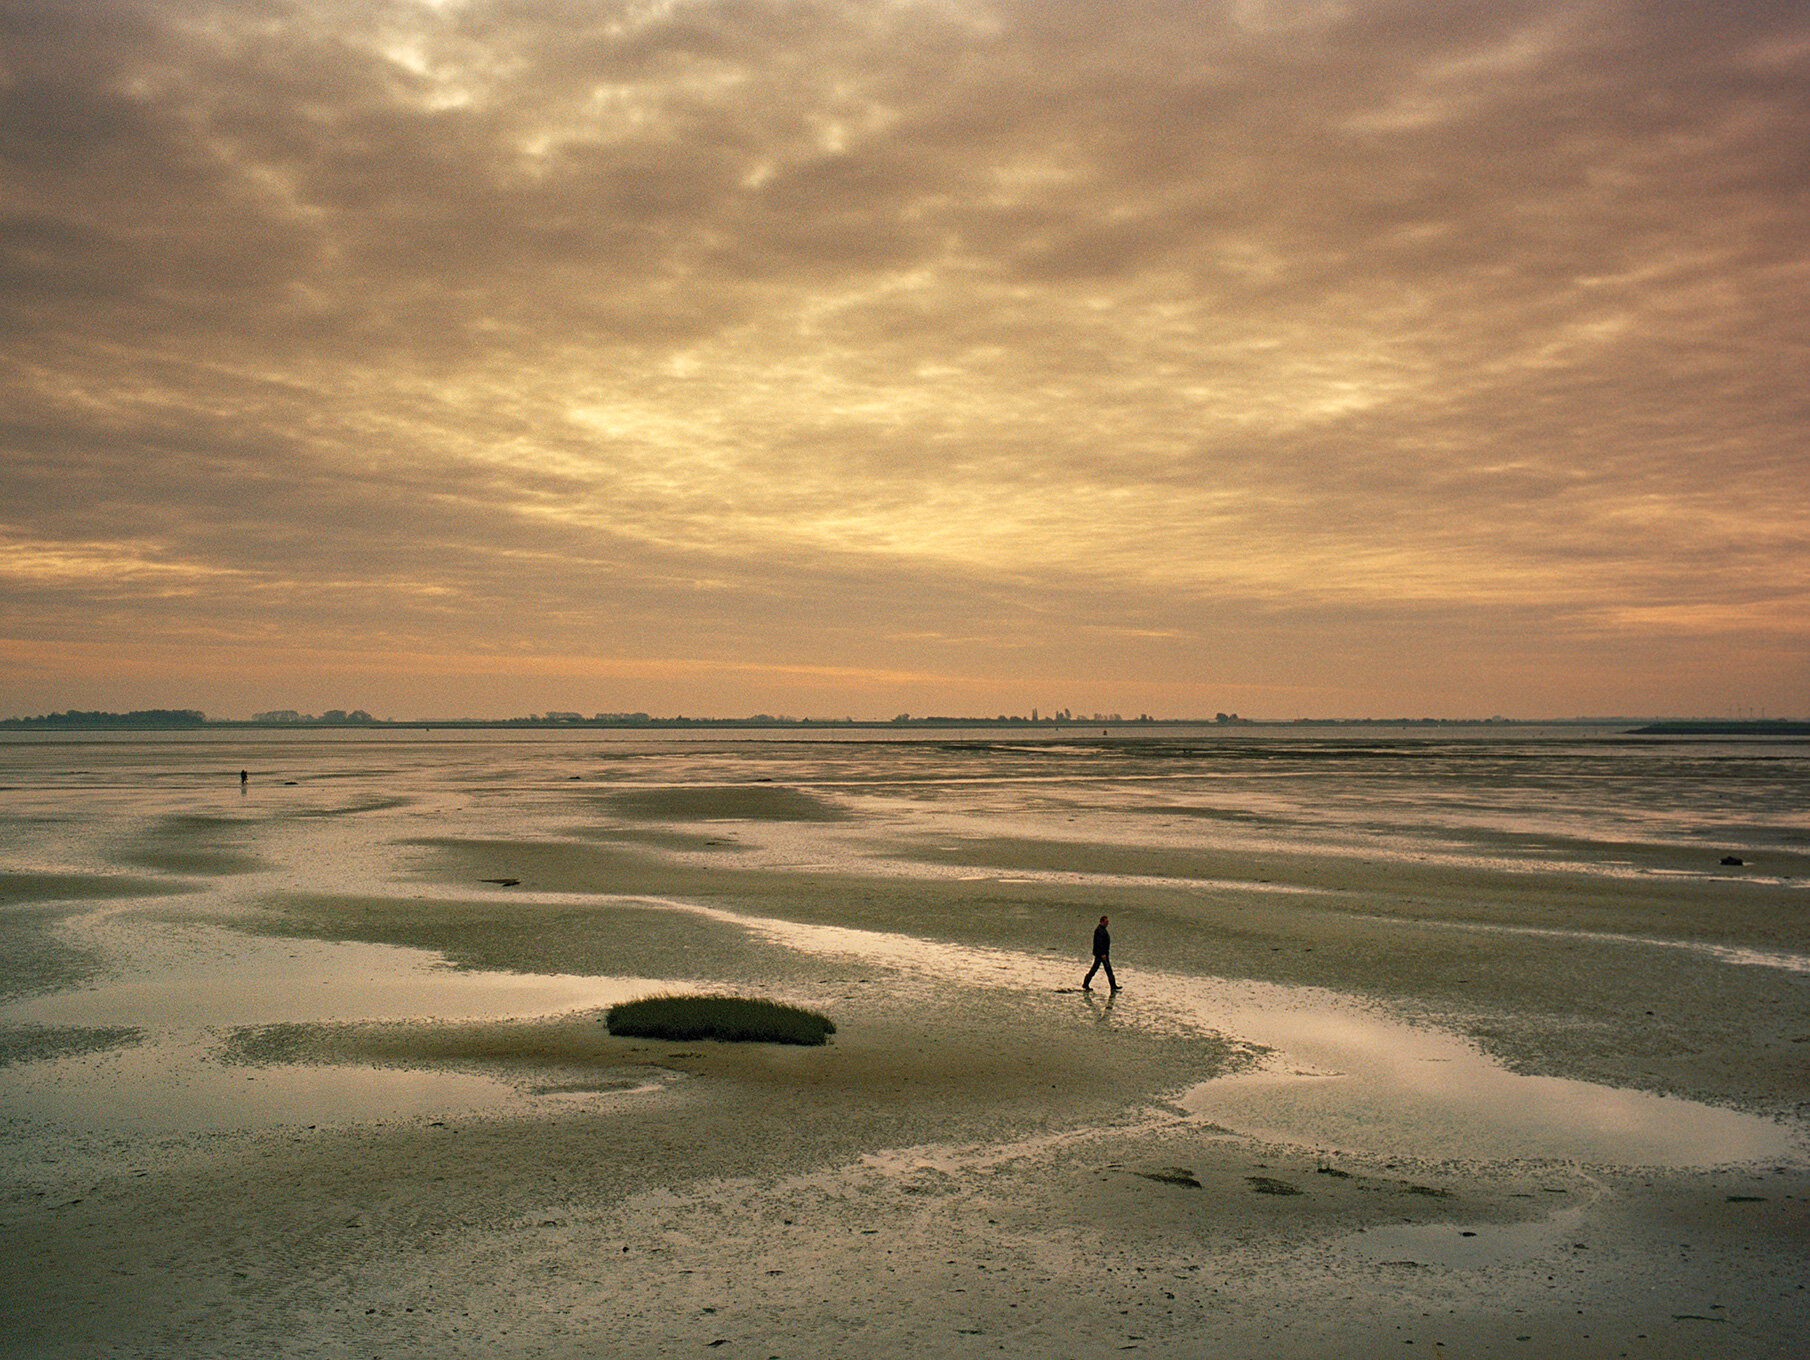   Low tide, Osterhelee,  The Netherlands, 2011  